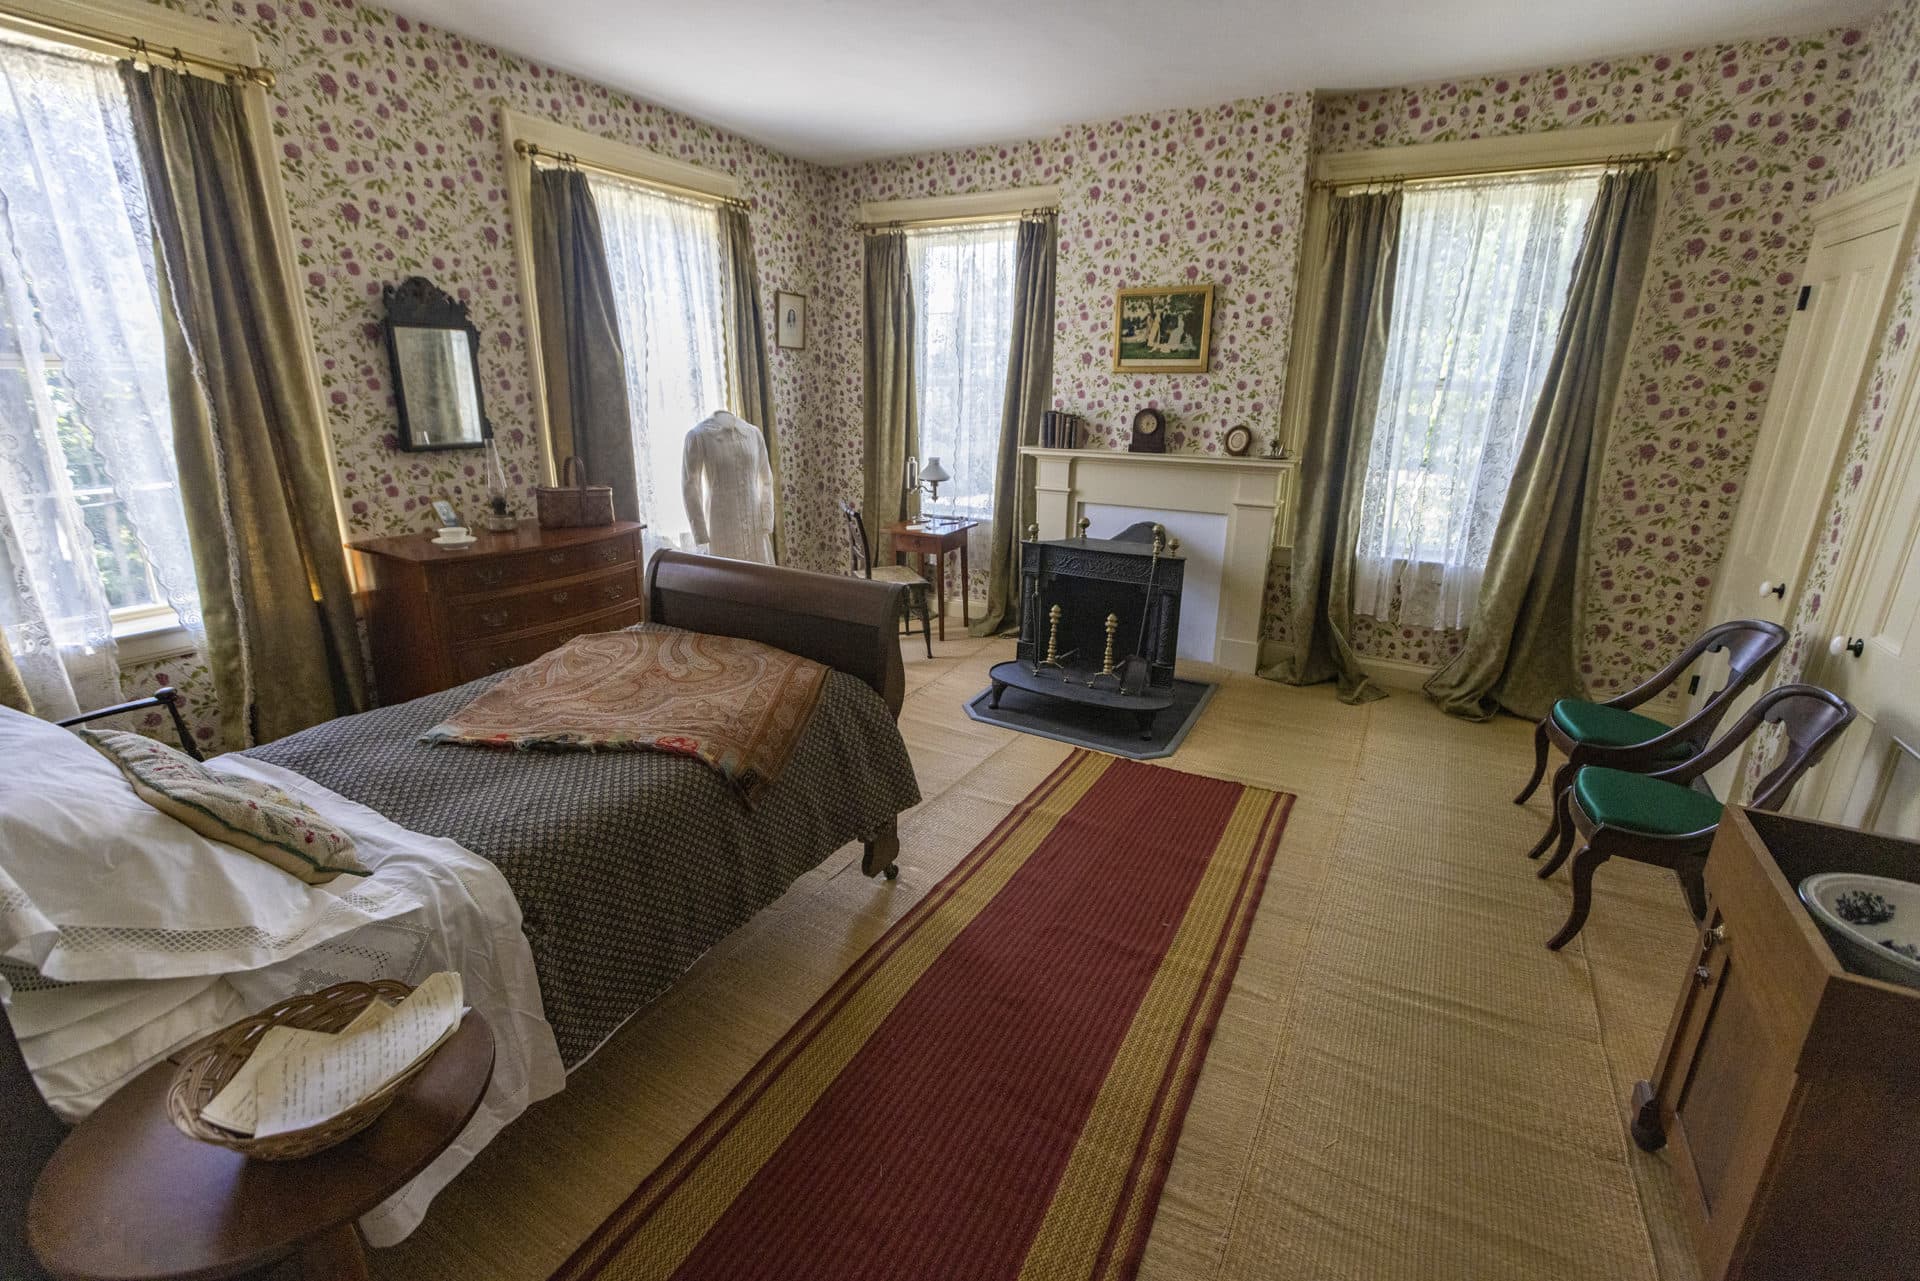 At the museum, Emily Dickinson's bedroom holds many of the poet's possessions, including her famed white dress. The pillow and coverlet on the bed are from the Apple TV+ show &quot;Dickinson.&quot; (Jesse Costa/WBUR)